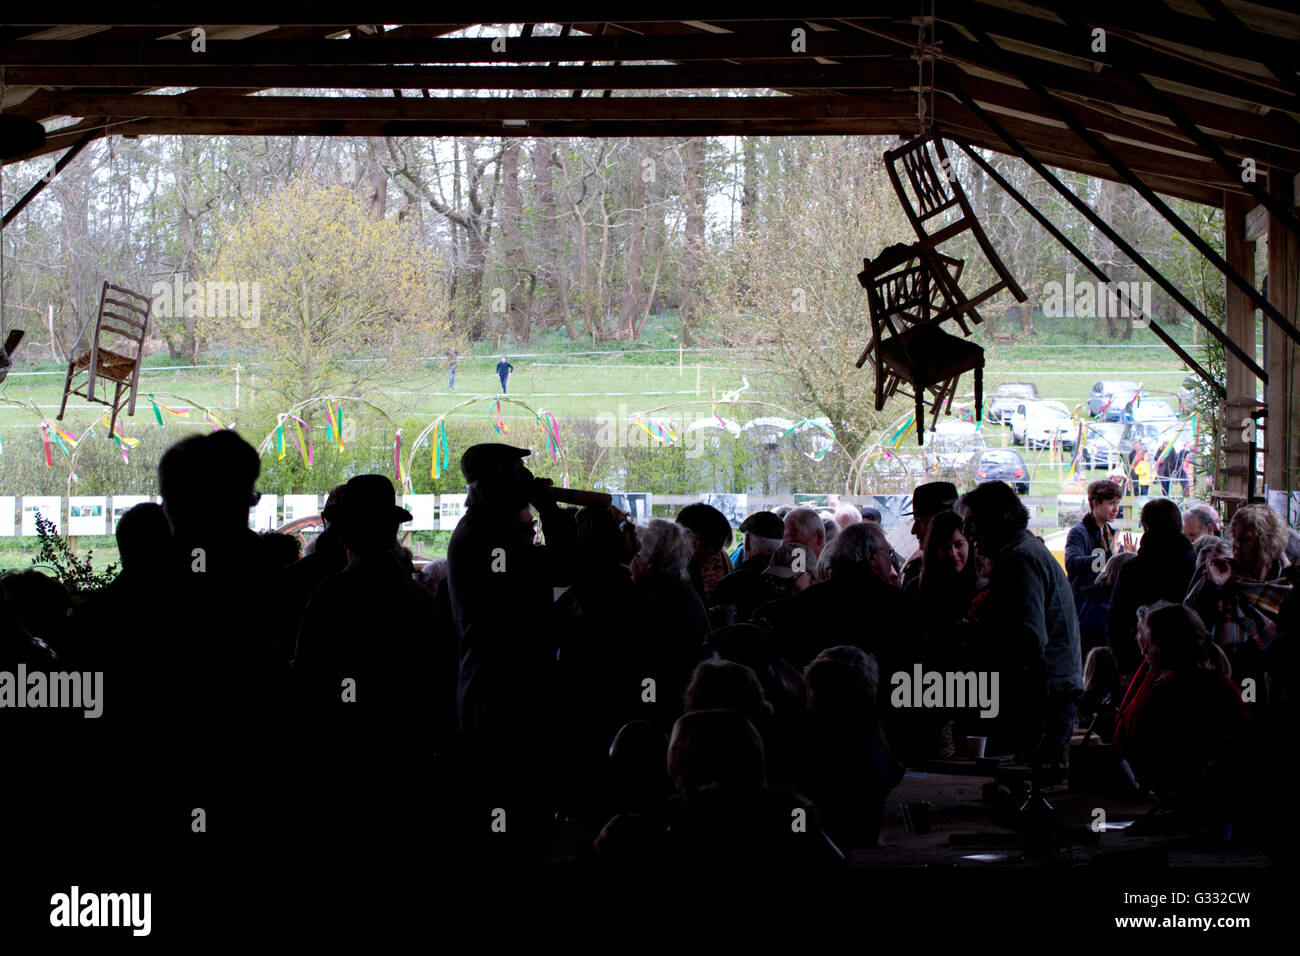 Silhouette of crowd at an arts festival with chairs hanging in the air Stock Photo